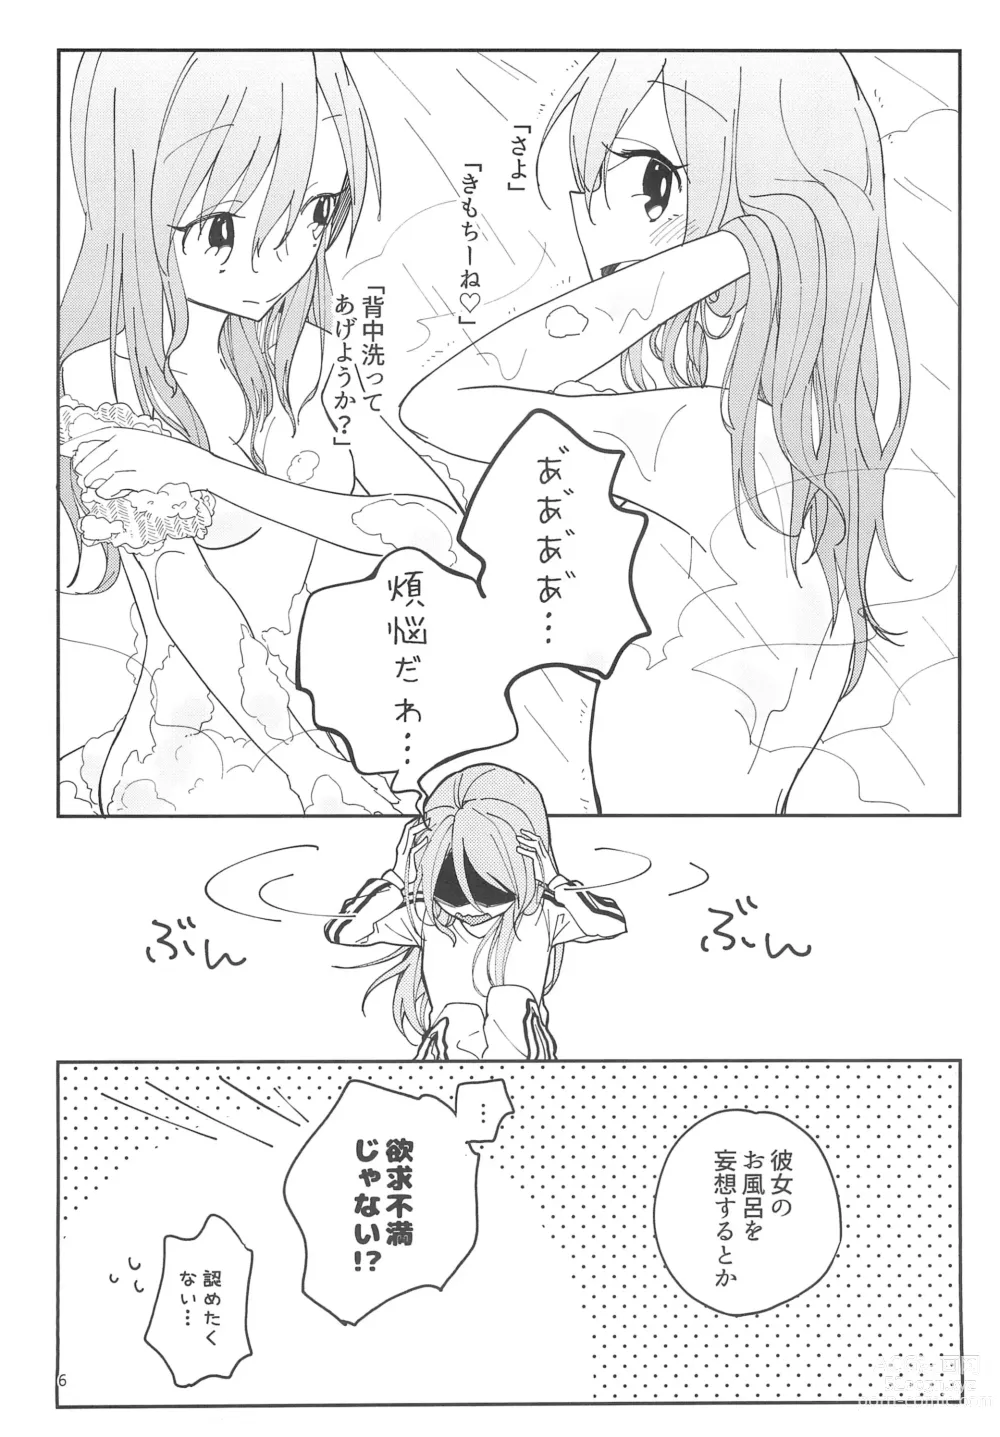 Page 8 of doujinshi I’m crazy about you.